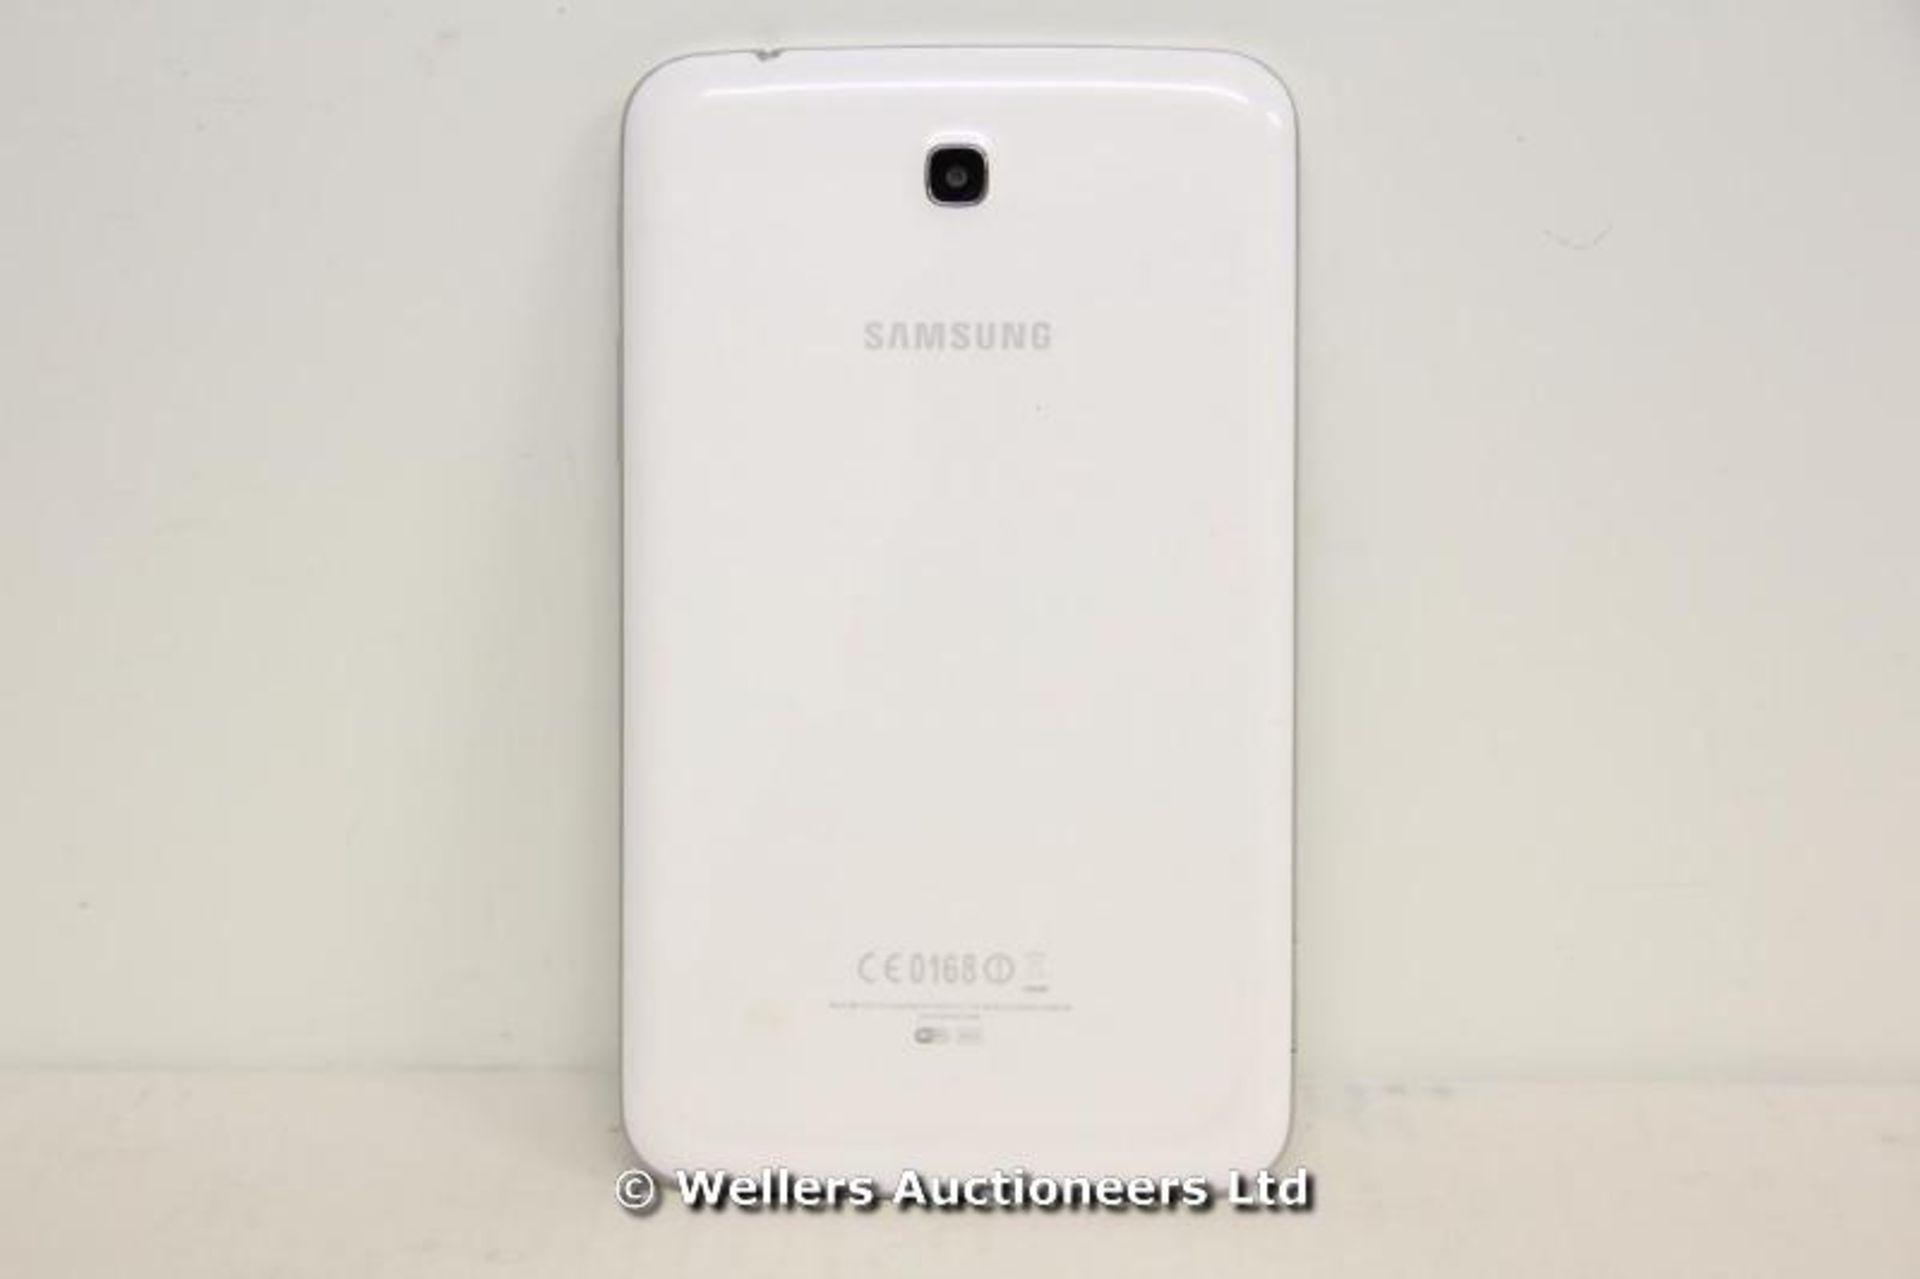 *"SAMSUNG TAB 3 7" TABLET / 1.2GHZ DUAL CORE PROCESSOR / RAM 1GB / 8GB HDD / ANDROID O/S / WITH - Image 2 of 3